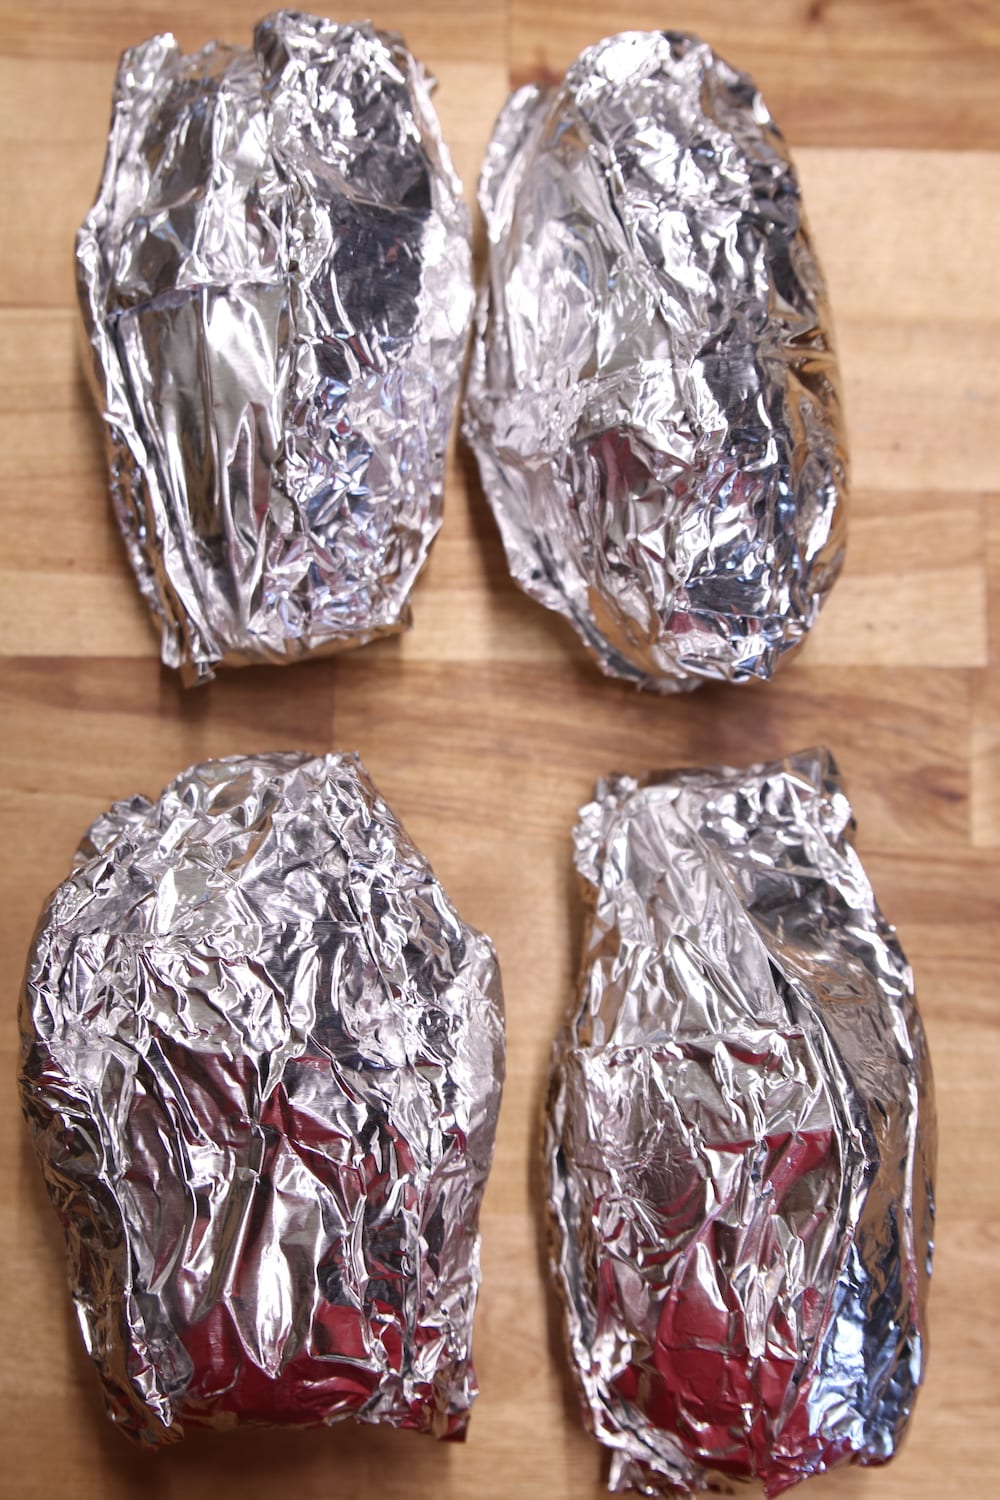 4 foil packets of baked potatoes